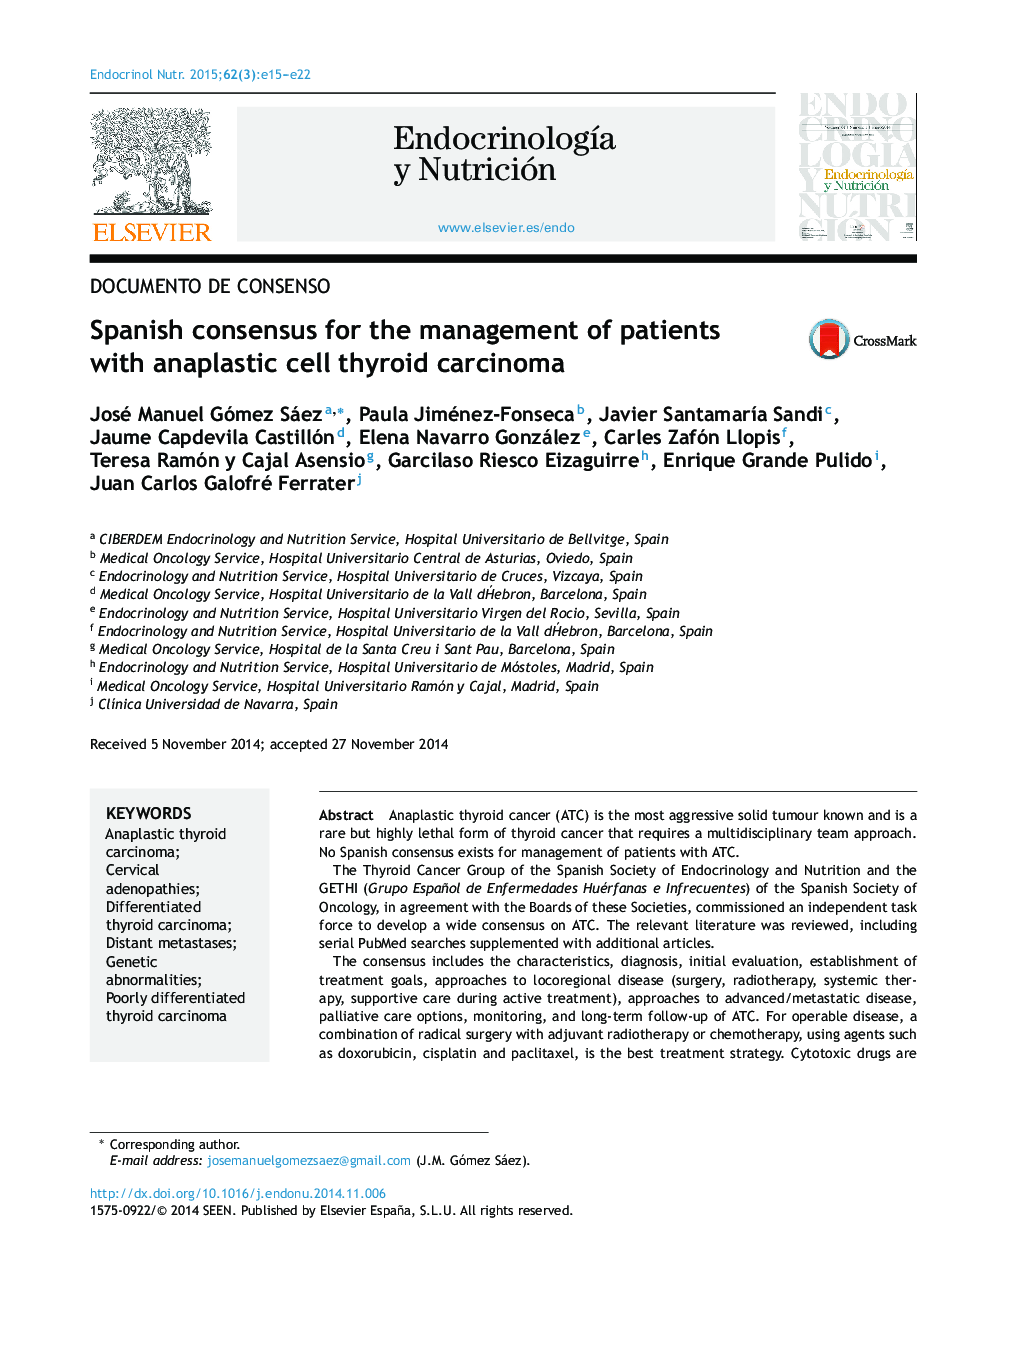 Spanish consensus for the management of patients with anaplastic cell thyroid carcinoma